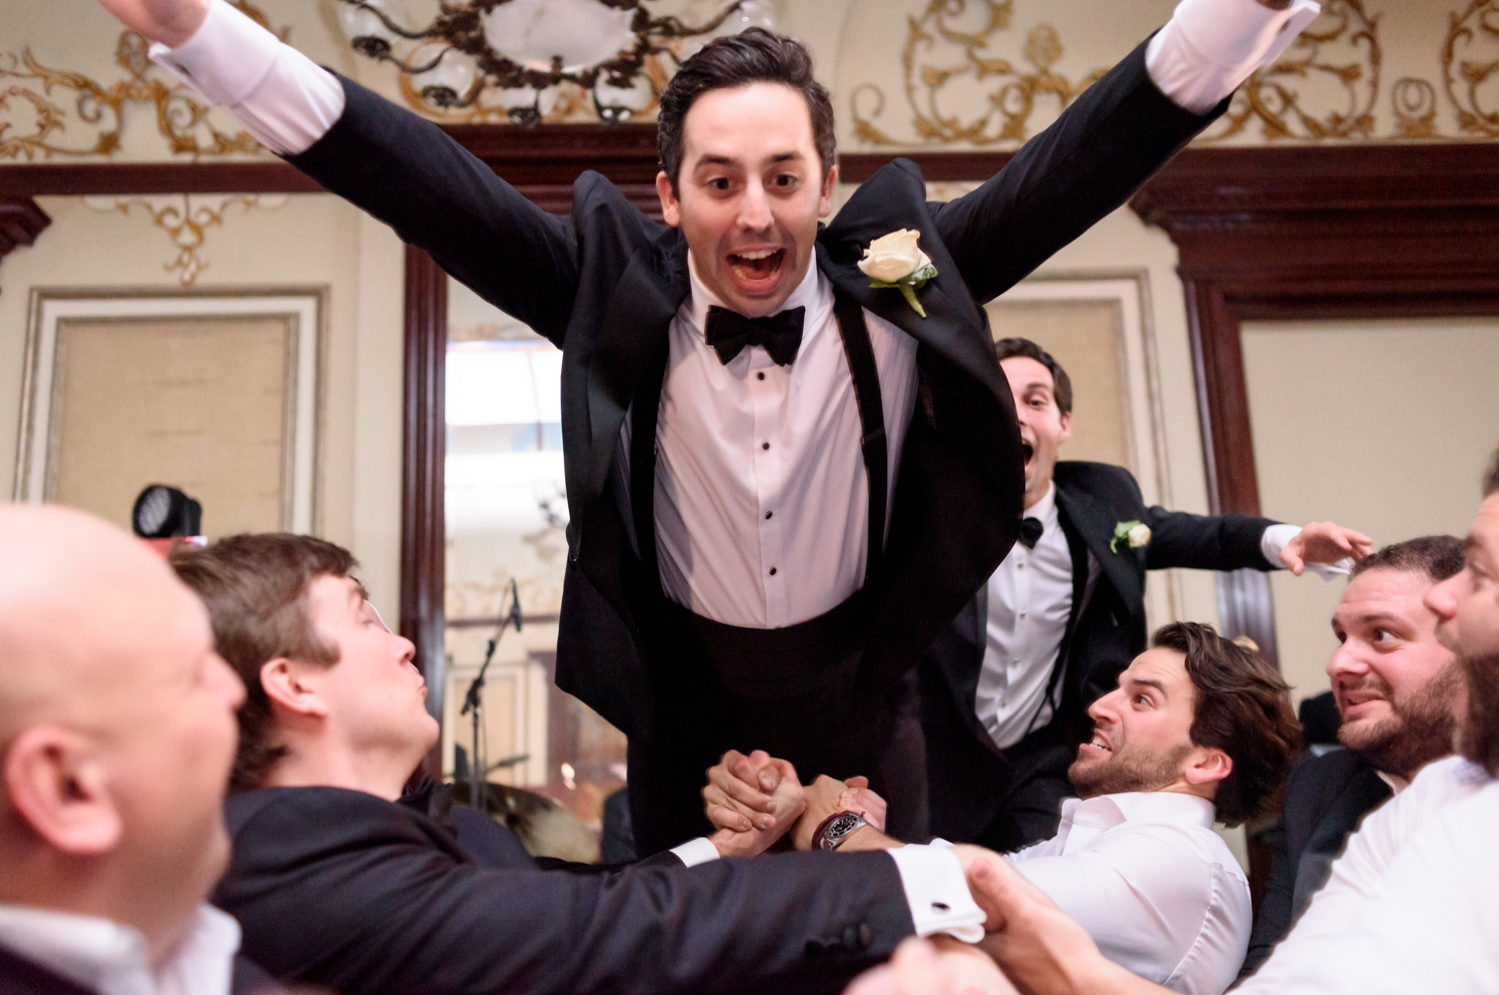 The groom leaps into the crowd with his arms outstretched like Superman.